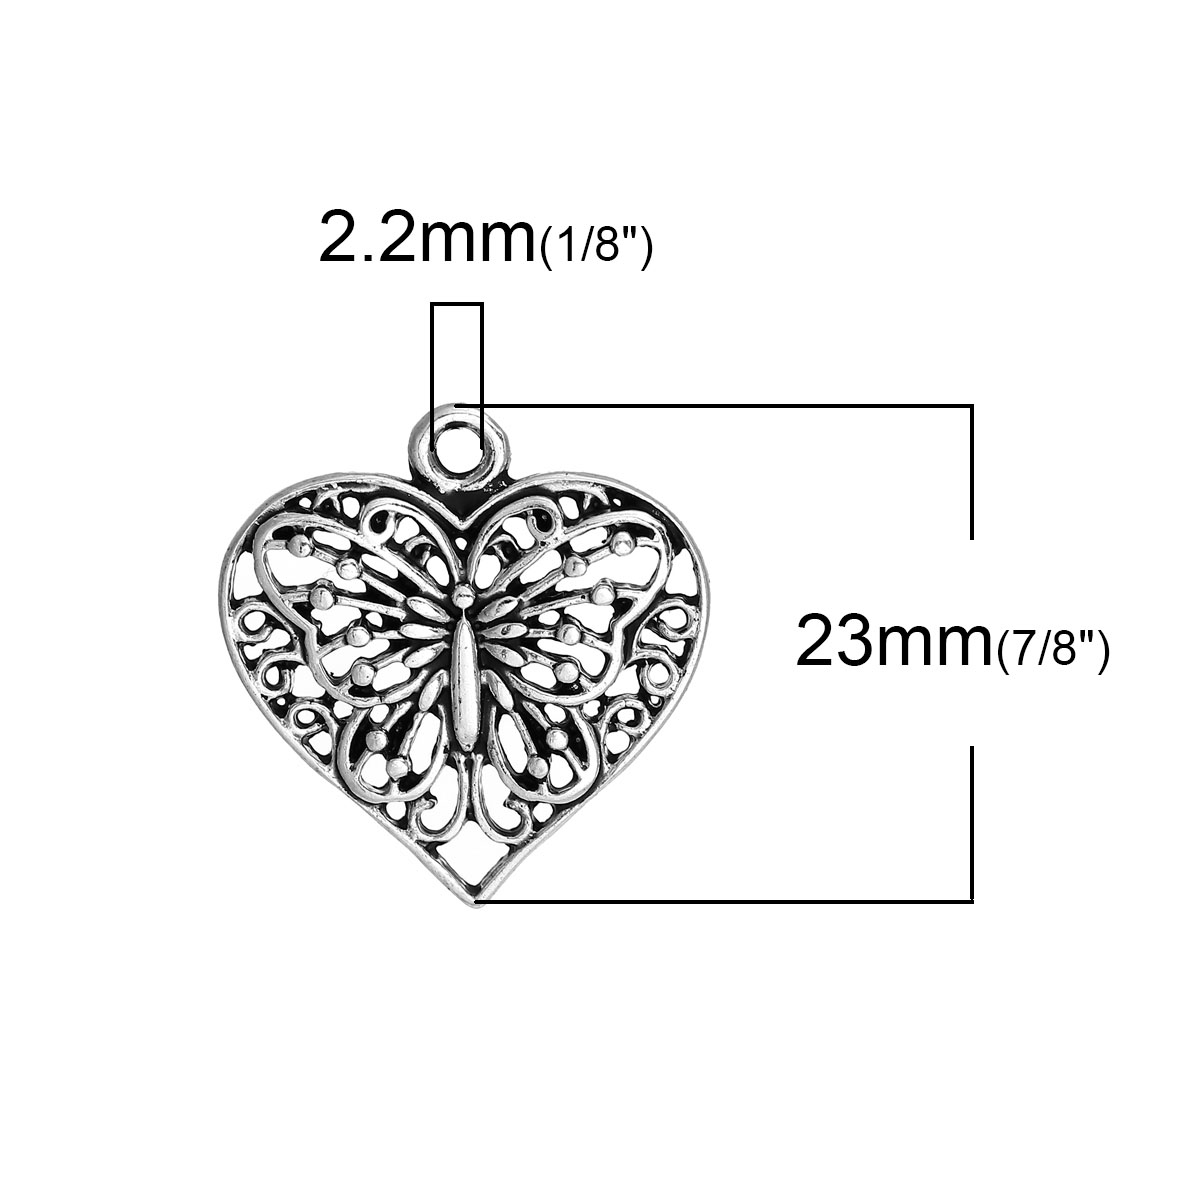 Picture of Zinc Based Alloy Charms Heart Antique Silver Butterfly Hollow 23mm( 7/8") x 22mm( 7/8"), 10 PCs